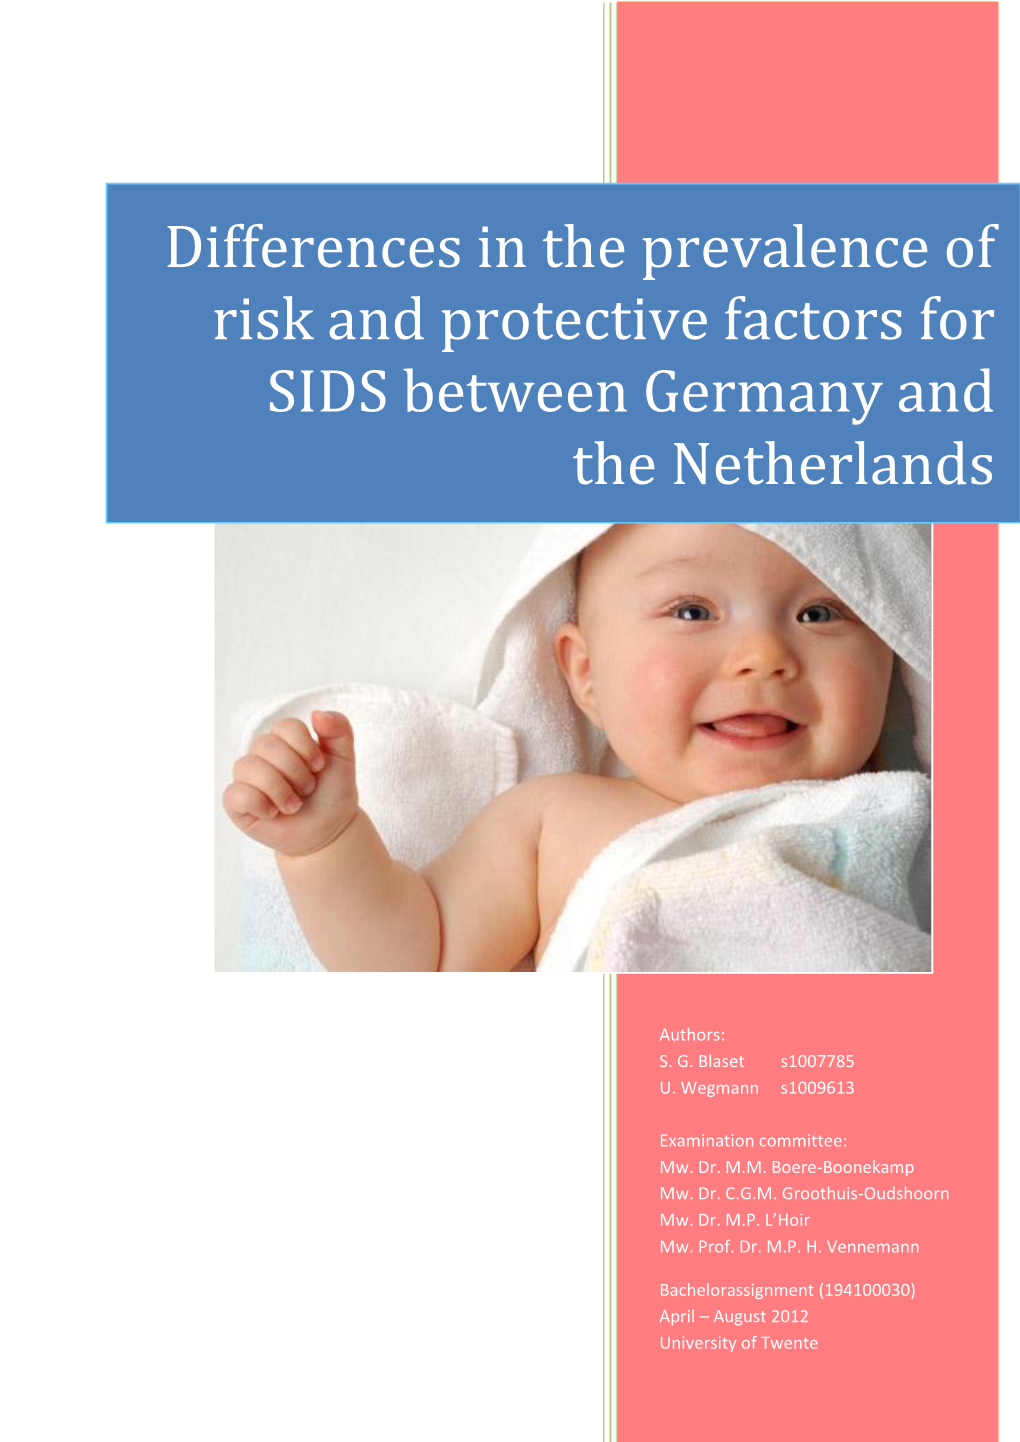 Differences in the Prevalence of Risk and Protective Factors for SIDS Between Germany and the Netherlands